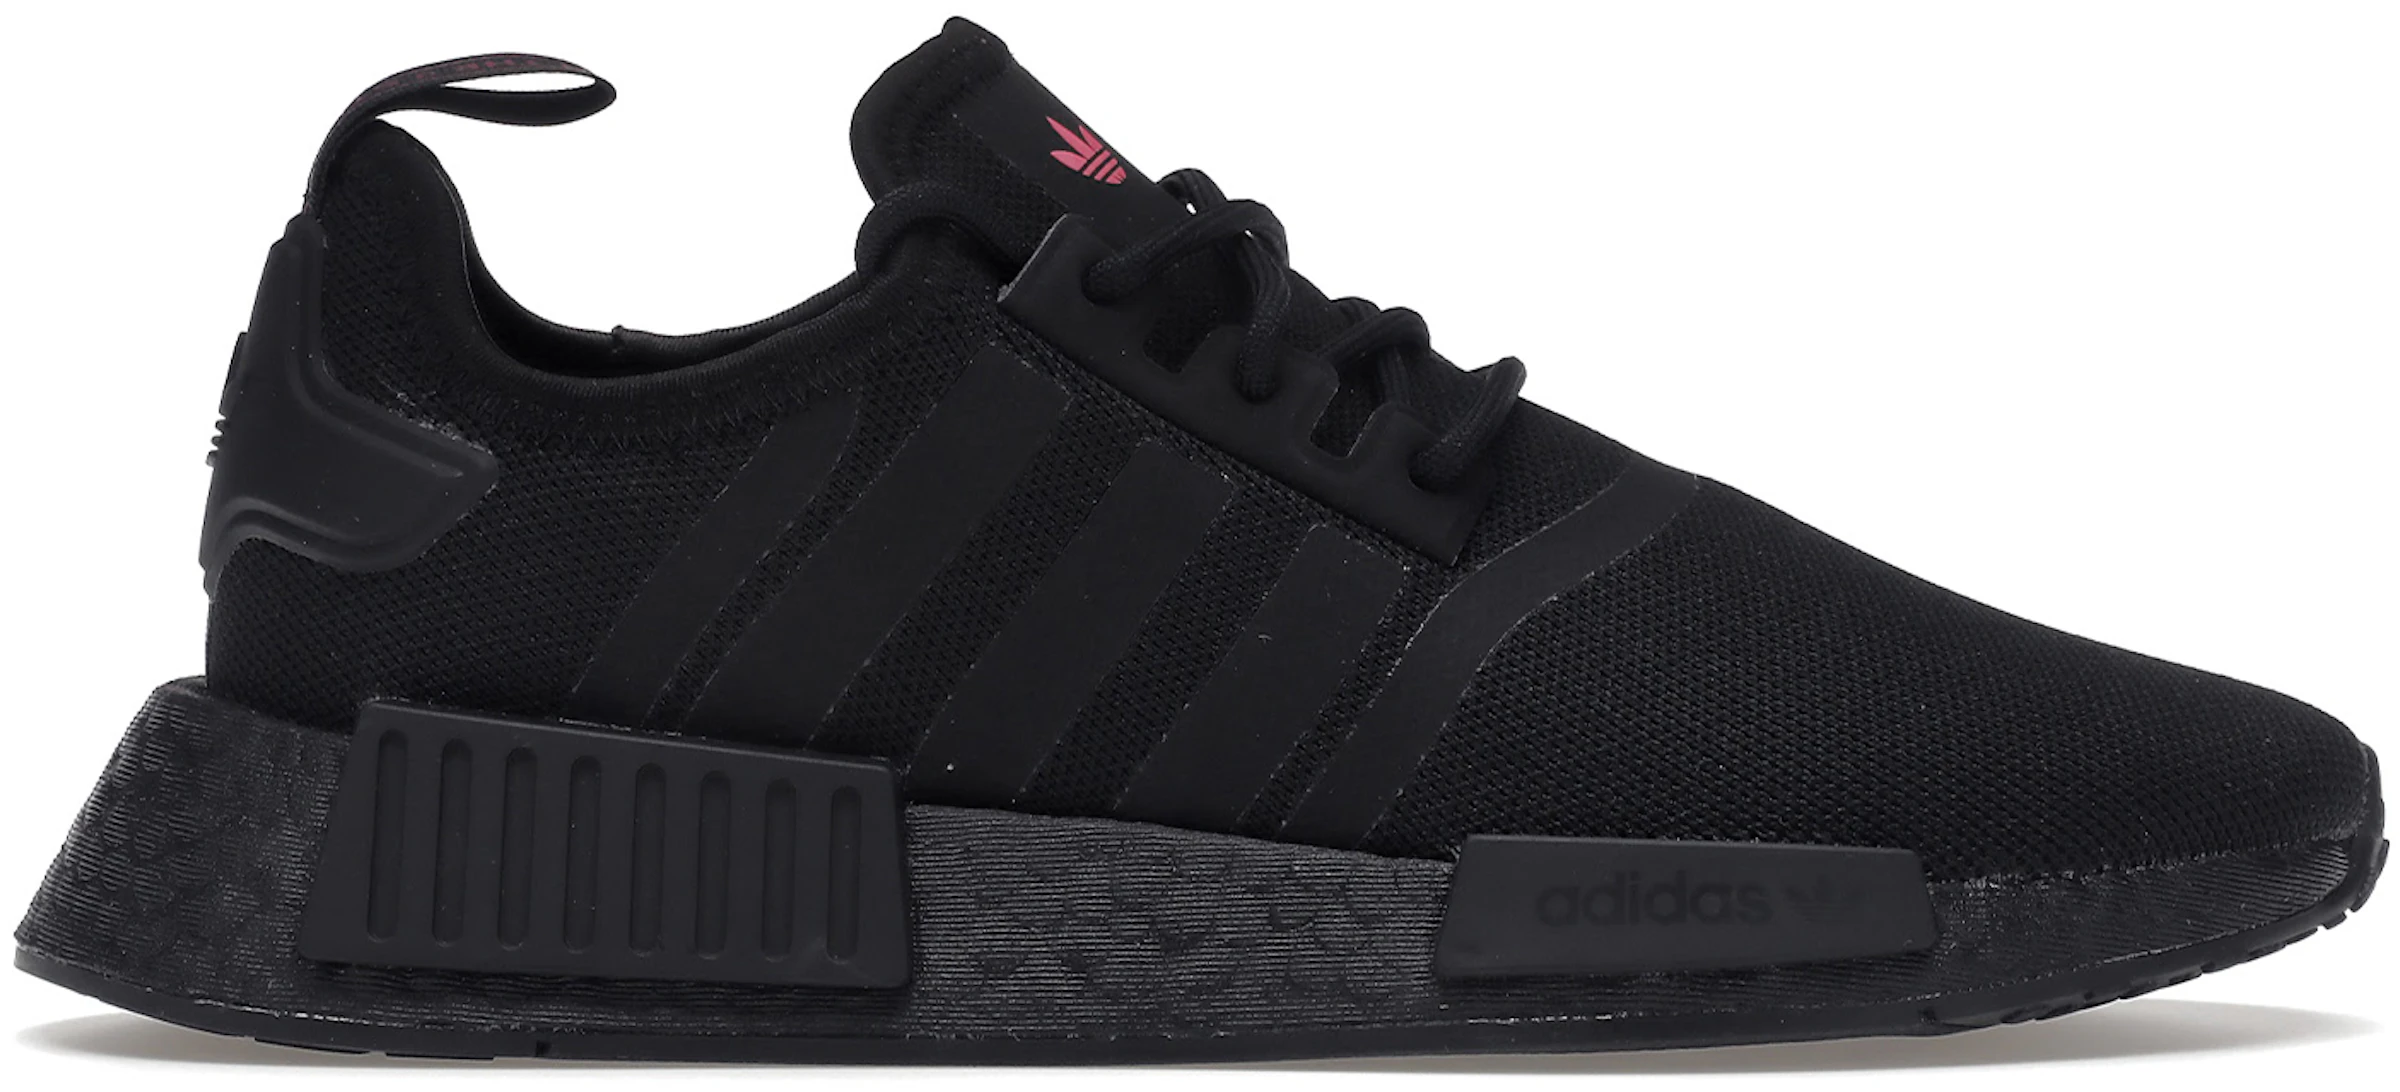 adidas NMD - All Sizes & Colorways at StockX